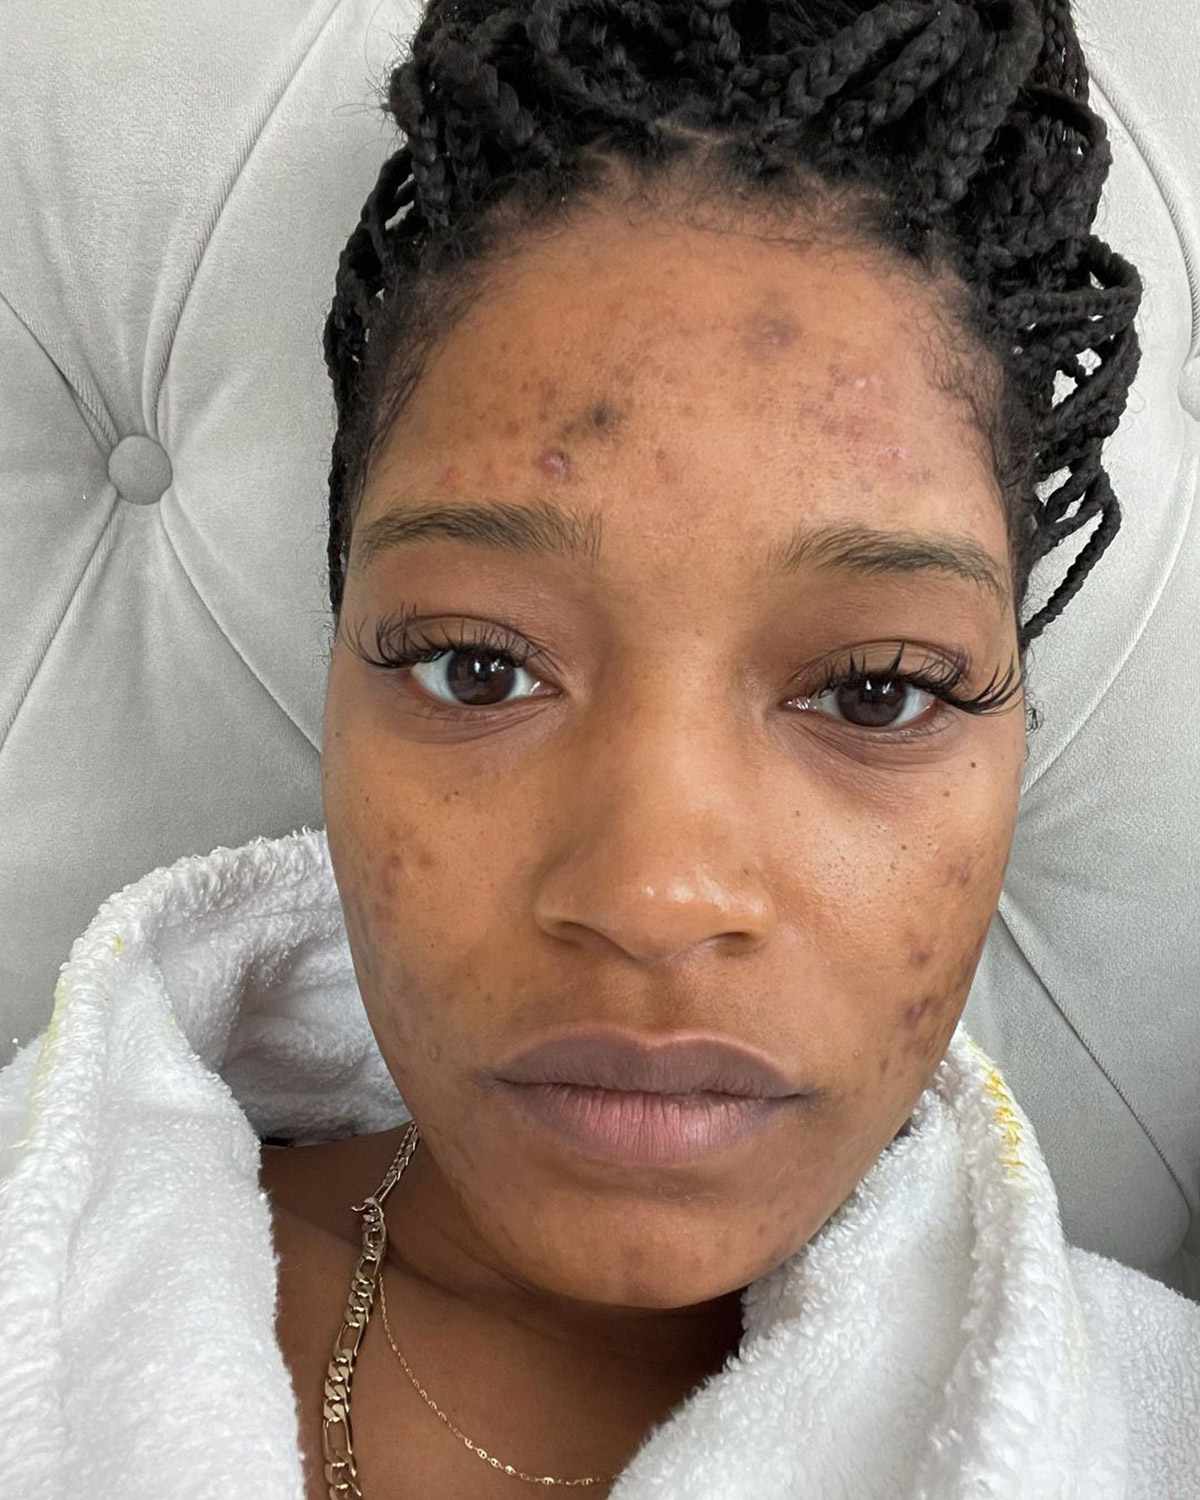 Keke Palmer Reveals She Has Polycystic Ovary Syndrome in Posts Showing Her Acne